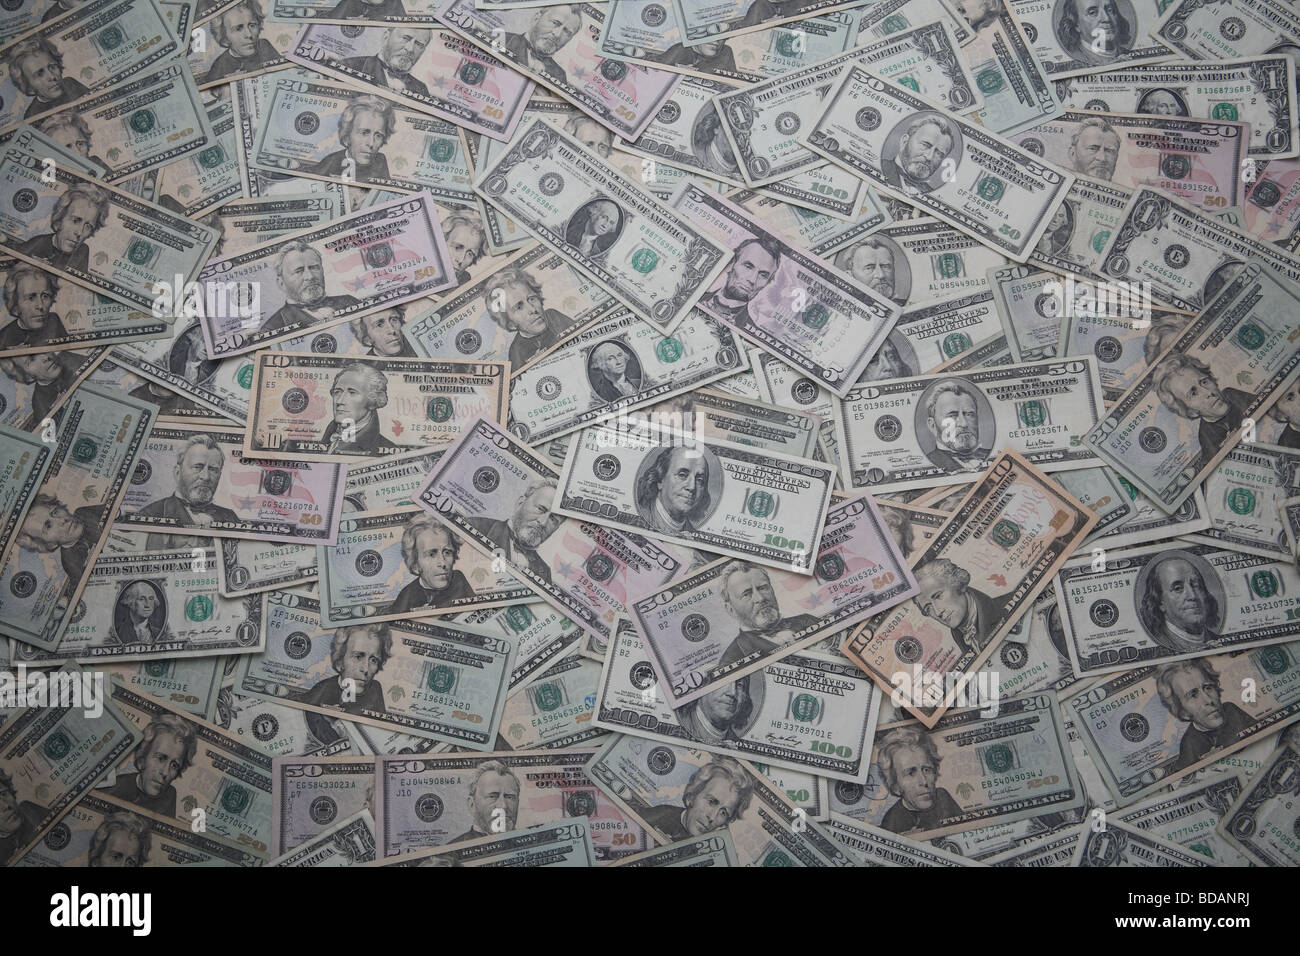 An arrangement of common American currency denominations. Stock Photo